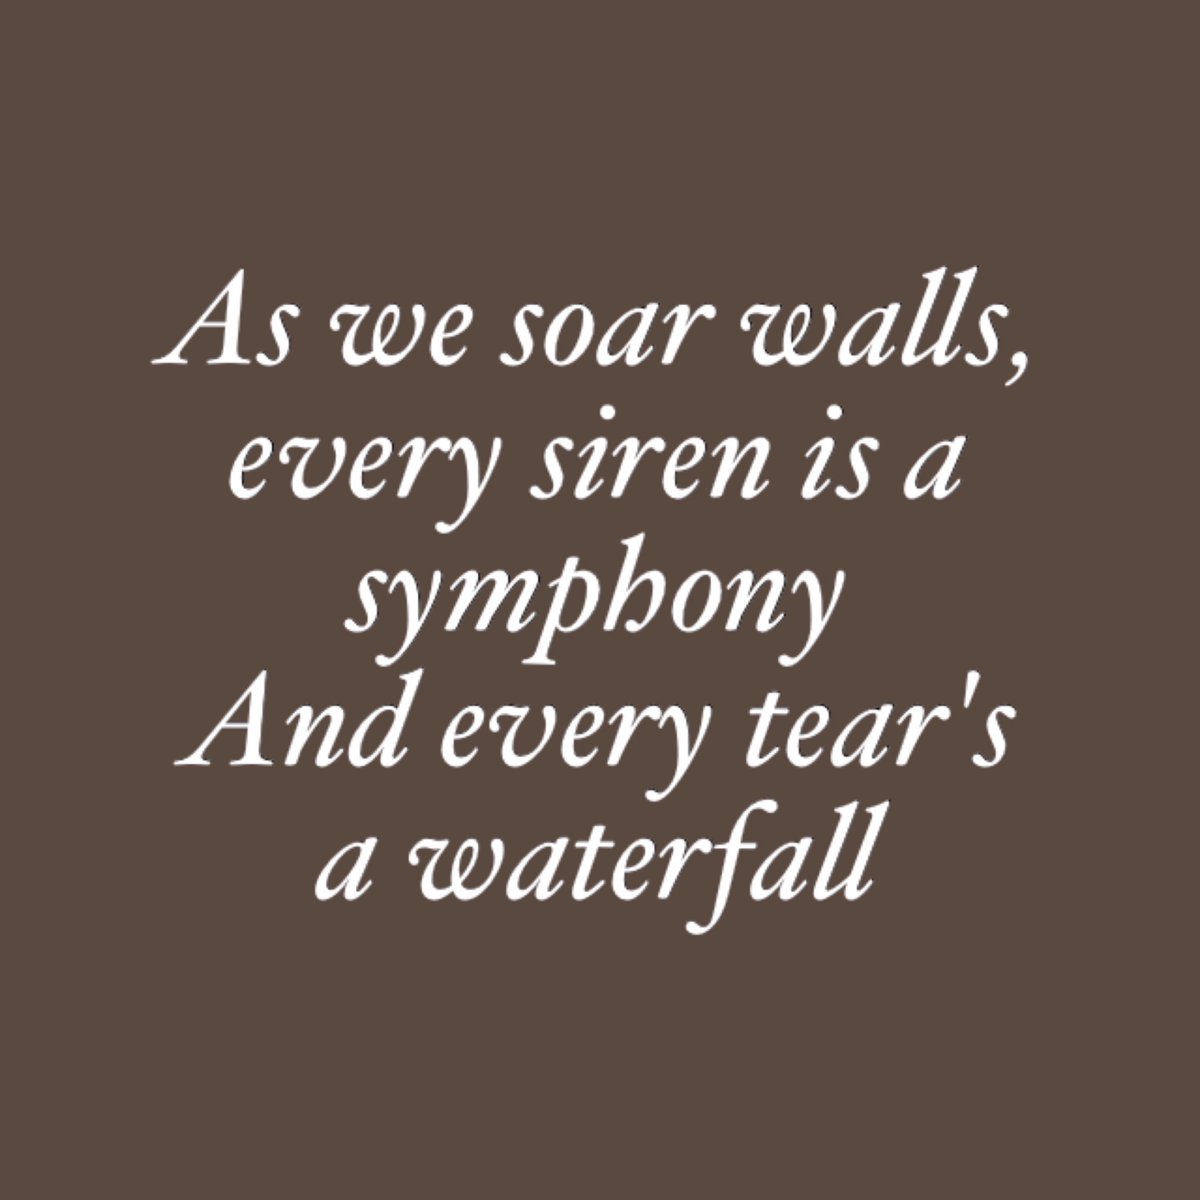 —Every Teardrop Is A Waterfall (by Coldplay)